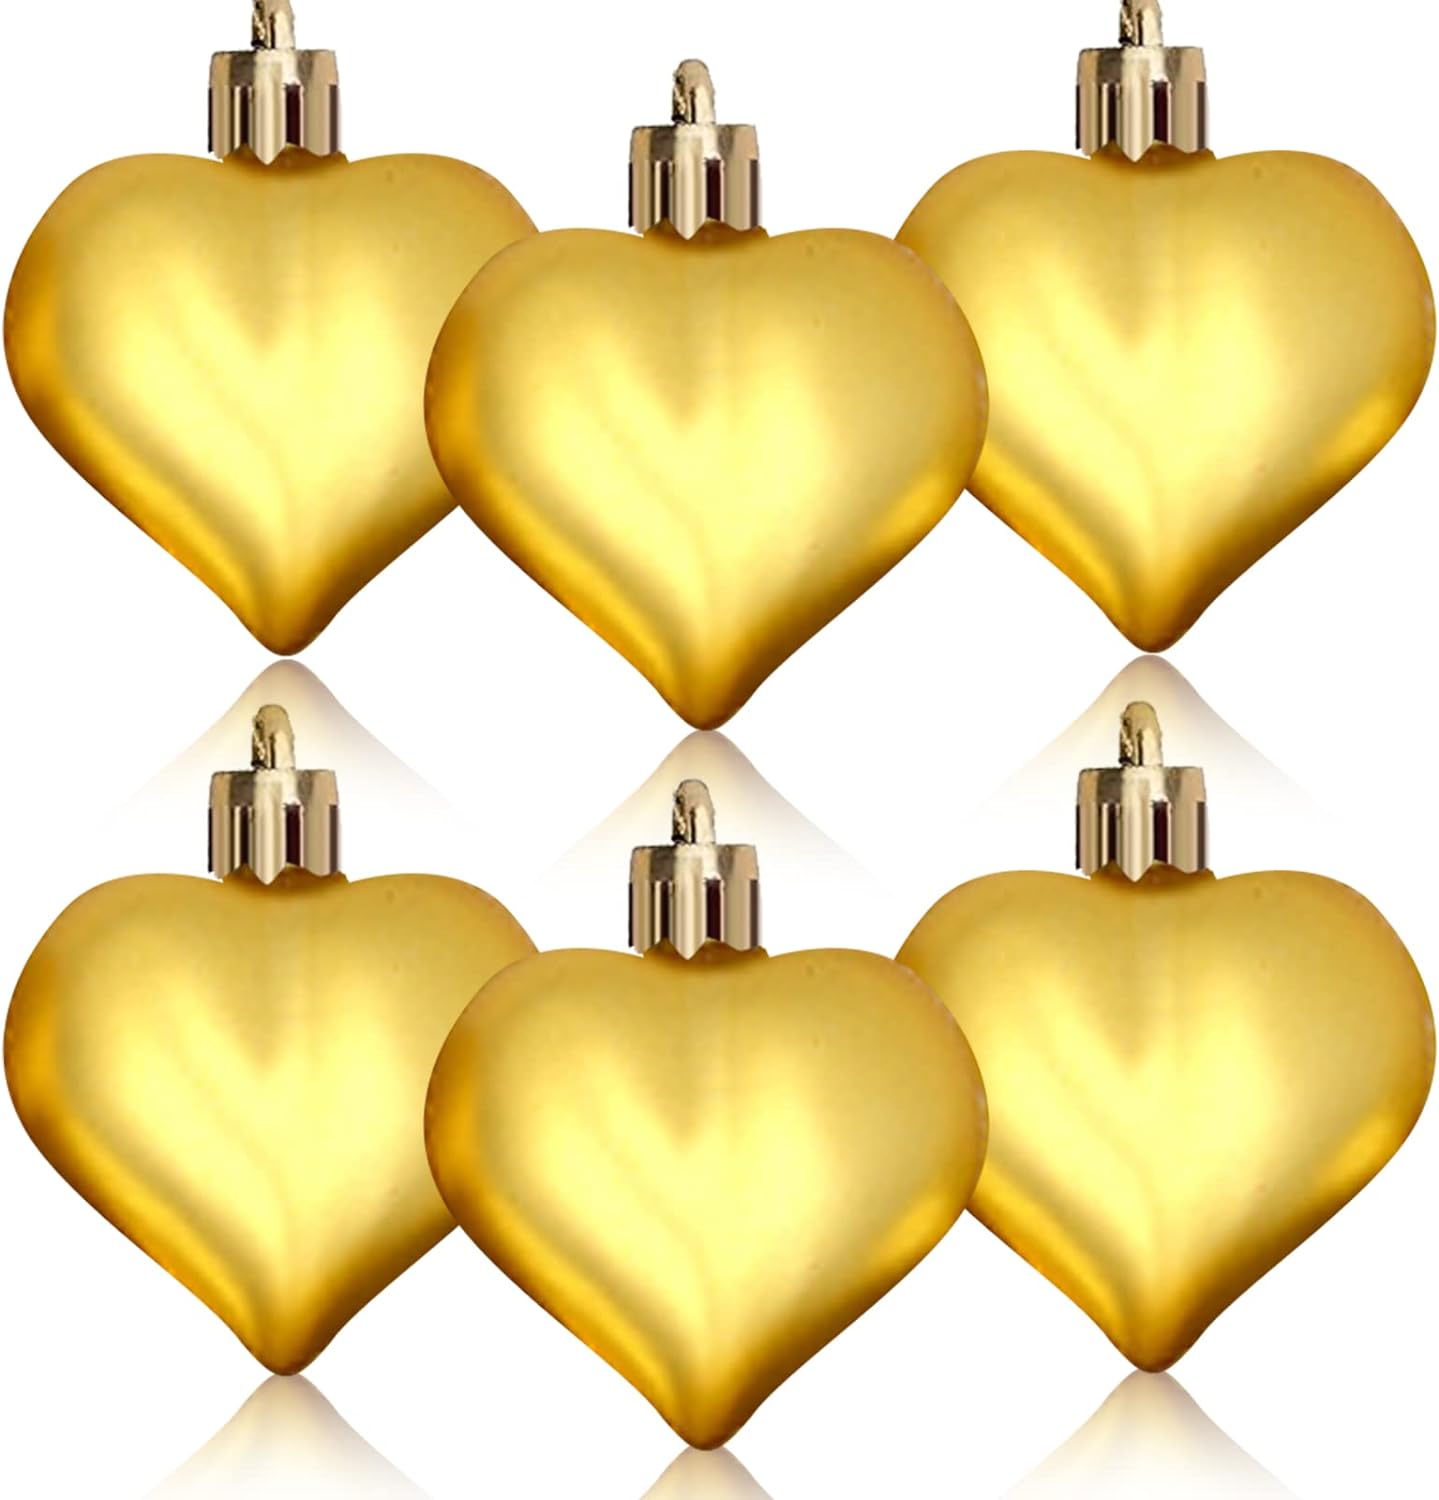 New Romantic Heart Shaped Hanging Ornaments, Party Ornaments of Plastic, Gold Heart Shaped Tree Decorations Hanging Baubles for Party, Valentine's Day, Wedding, Anniversary 【 6 PCS 】